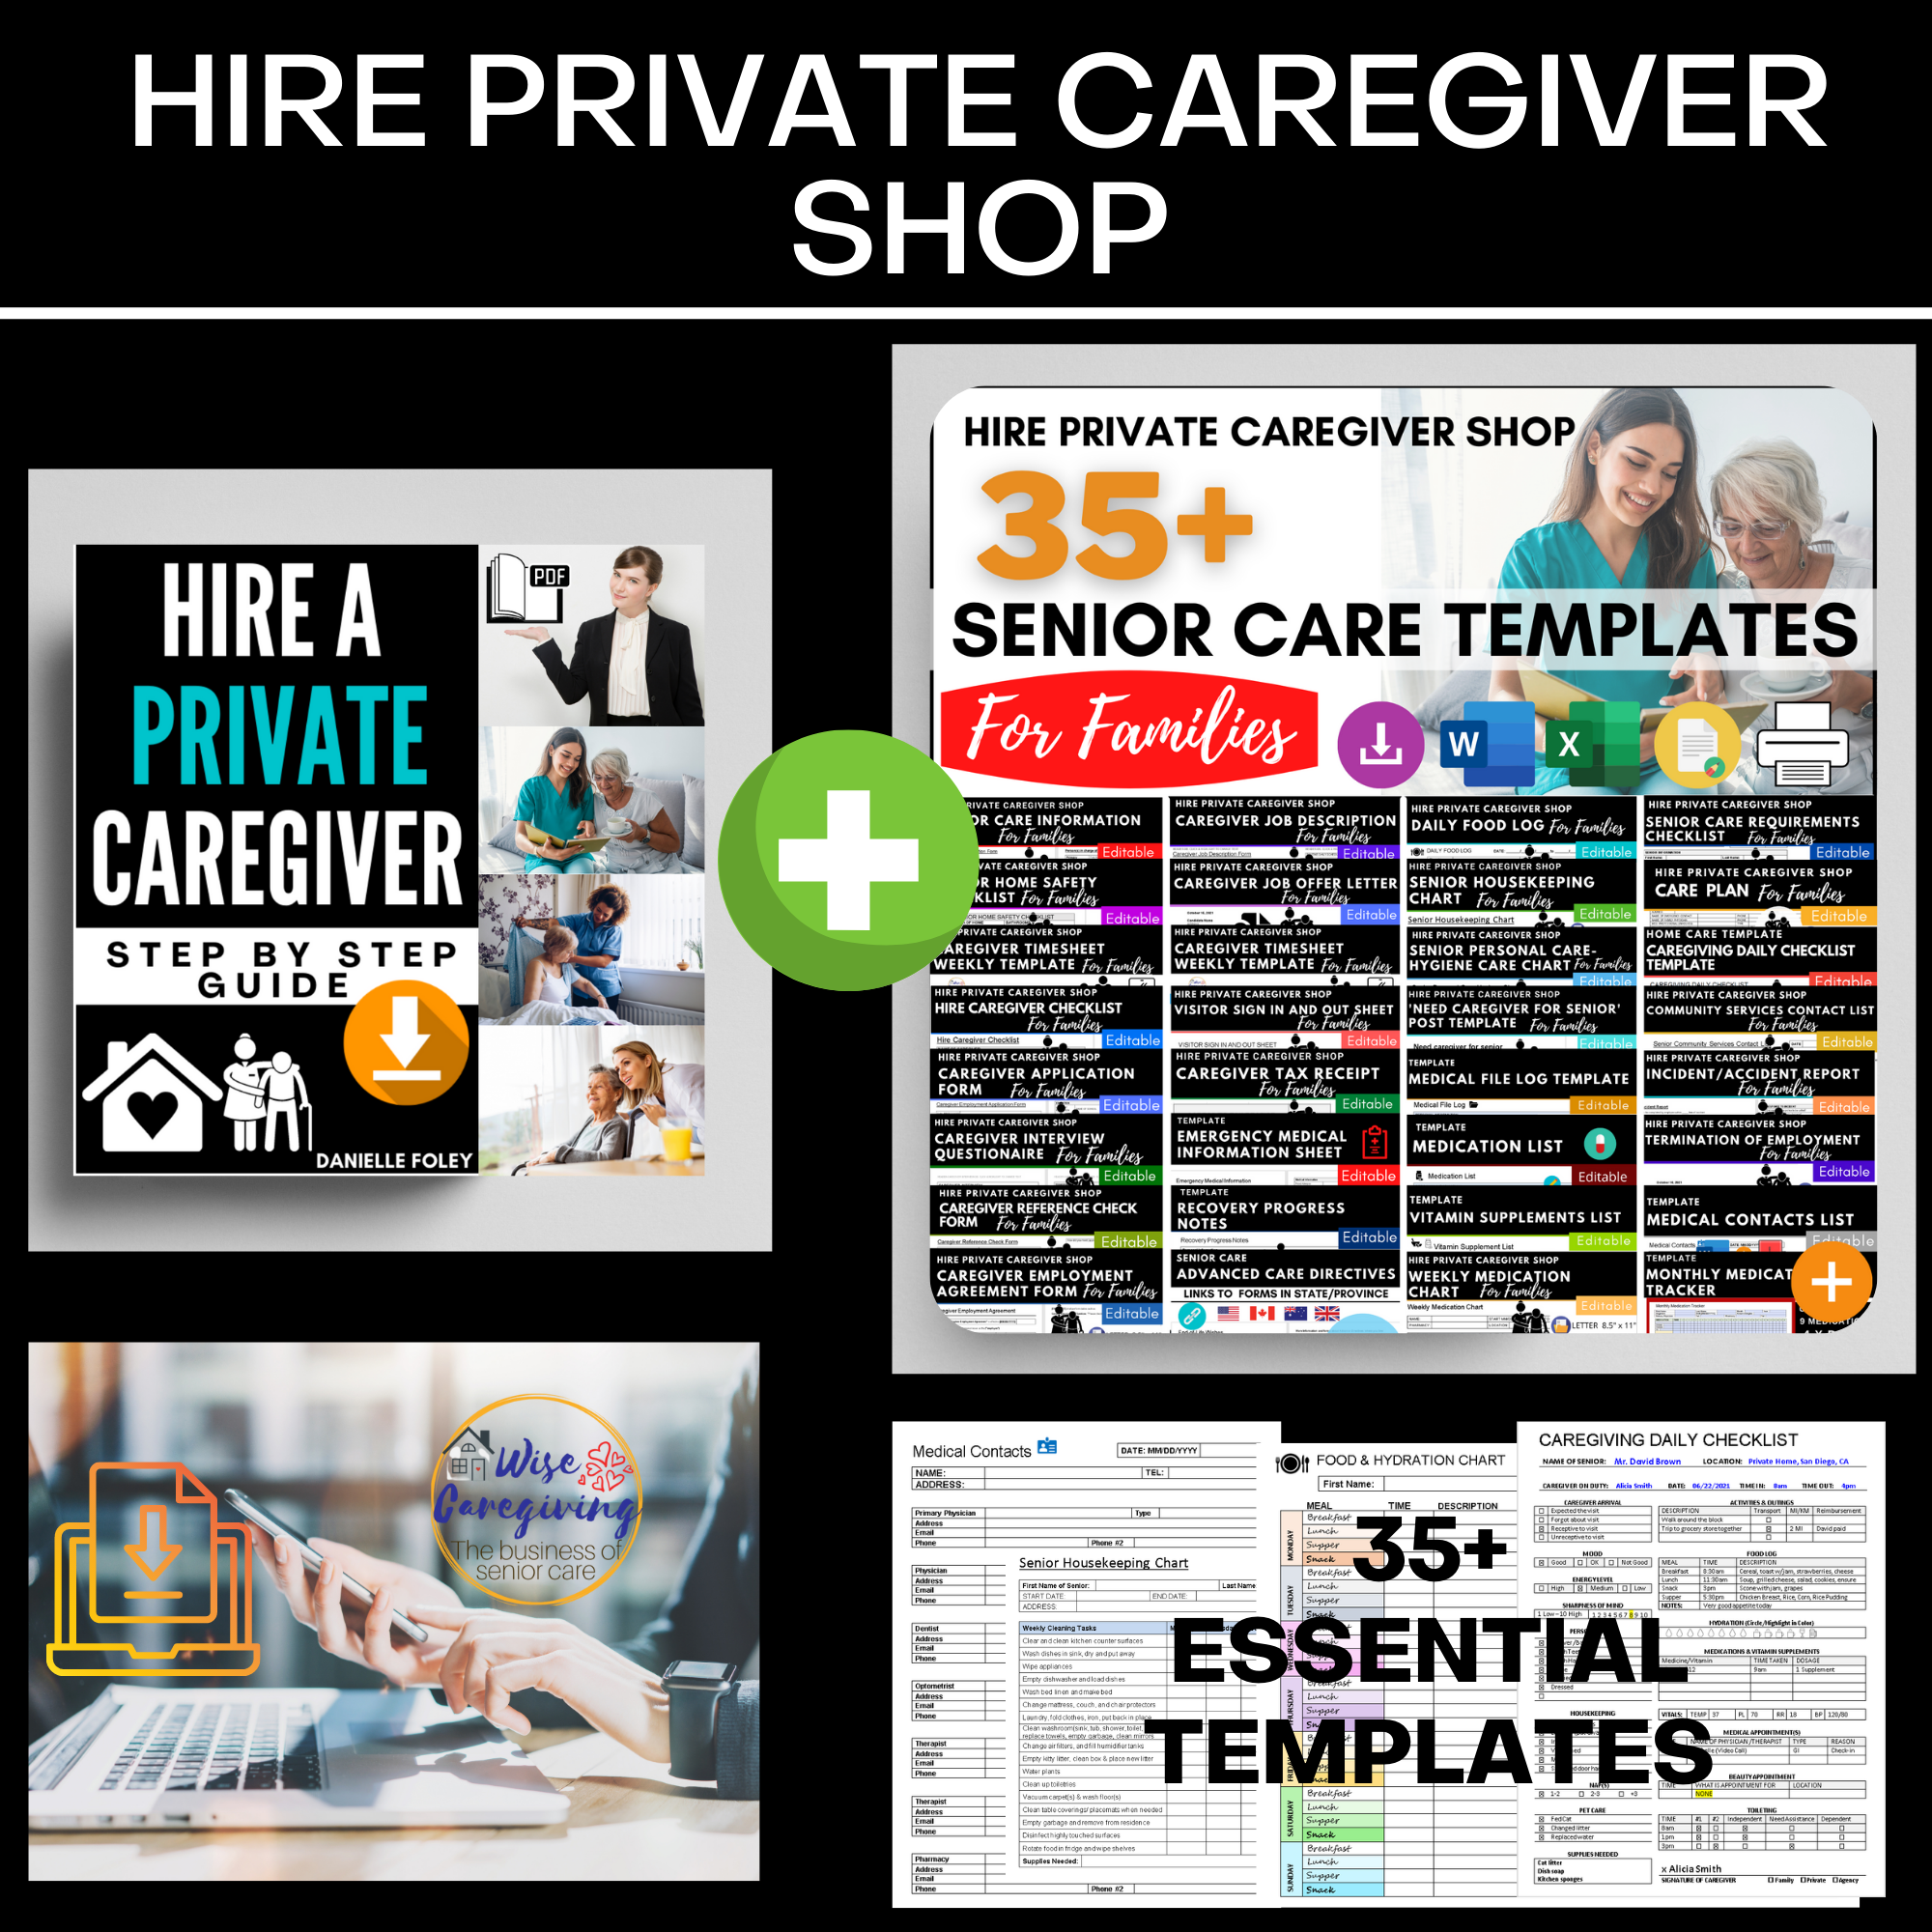 Hire Private Caregiver guide book and templates-wise caregiving